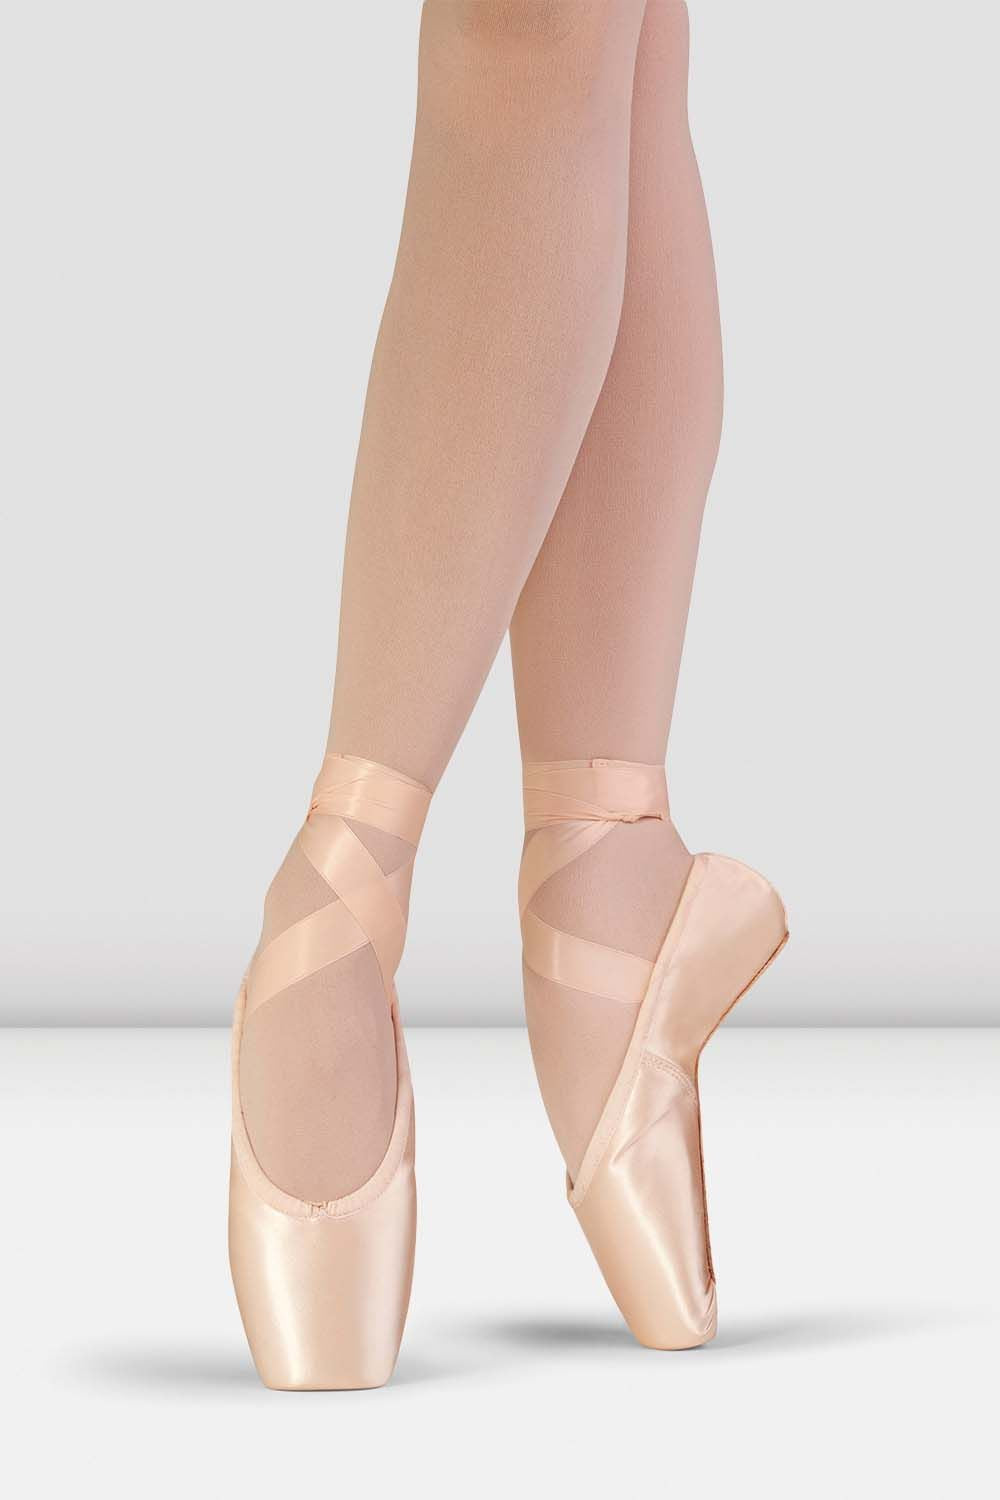 baseball Blind Samme Synthesis Stretch Pointe Shoes, Pink – BLOCH Dance US